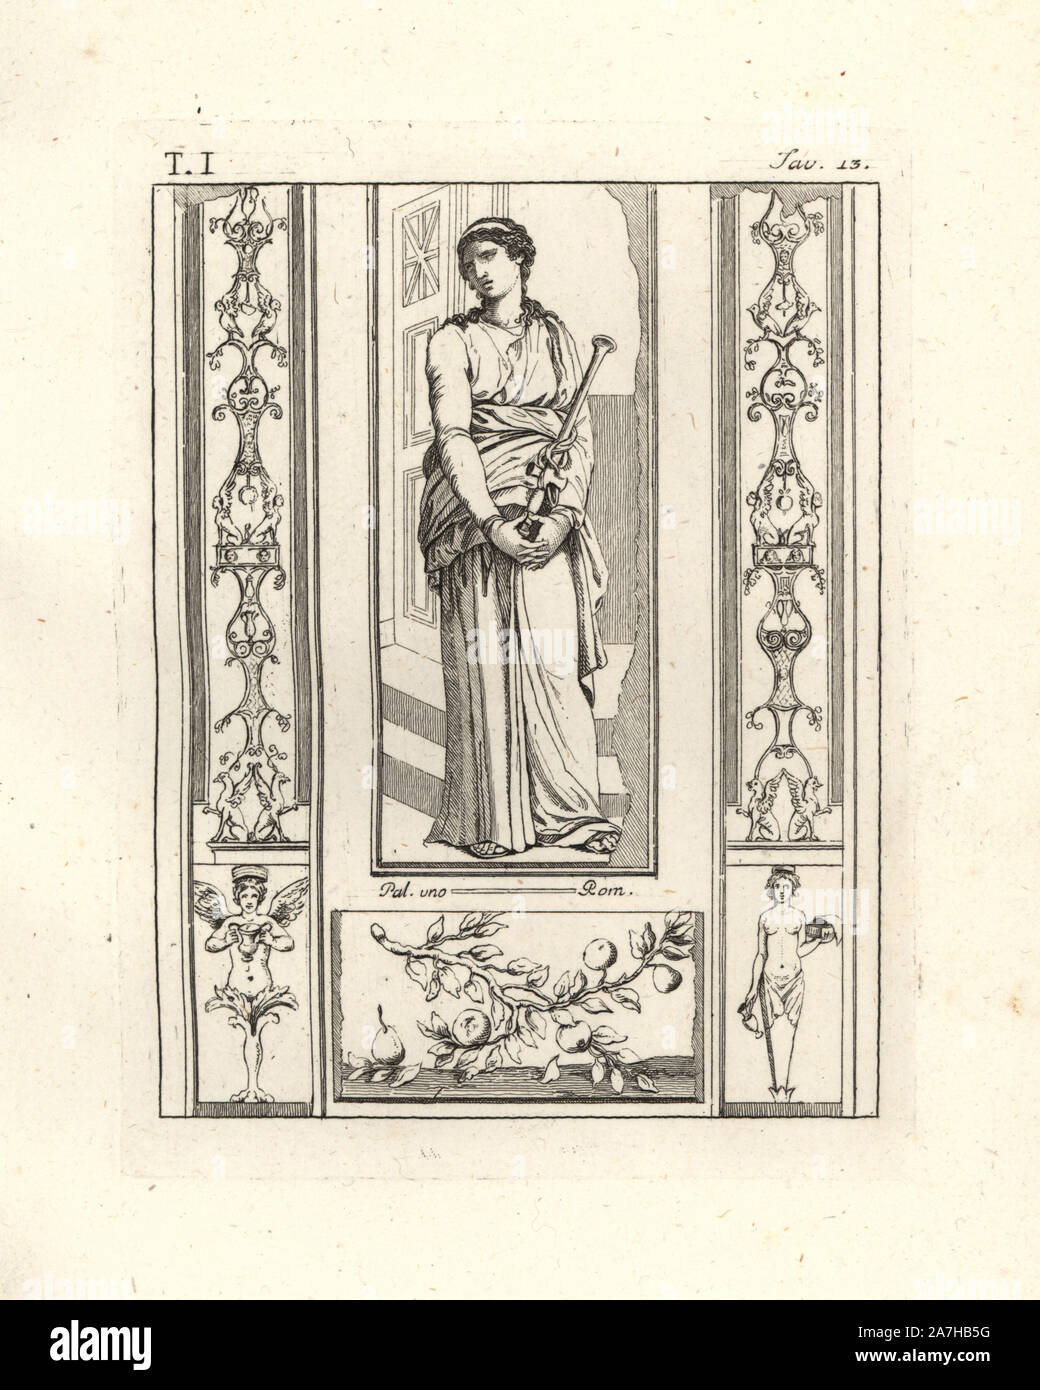 While some ancient authorities believe this to be a portrait of Dido as described by Virgil, modern opinion holds that this is Melpomene, the Muse of Tragedy, wearing Carthaginian costume, holding a sword in a strange sheath with a mushroom-shaped tip. Copperplate engraved by Tommaso Piroli from his own 'Antichita di Ercolano' (Antiquities of Herculaneum), Rome, 1789.  Italian artist and engraver Piroli (1752-1824) published six volumes between 1789 and 1807 documenting the murals and bronzes found in Heraculaneum and Pompeii. Stock Photo